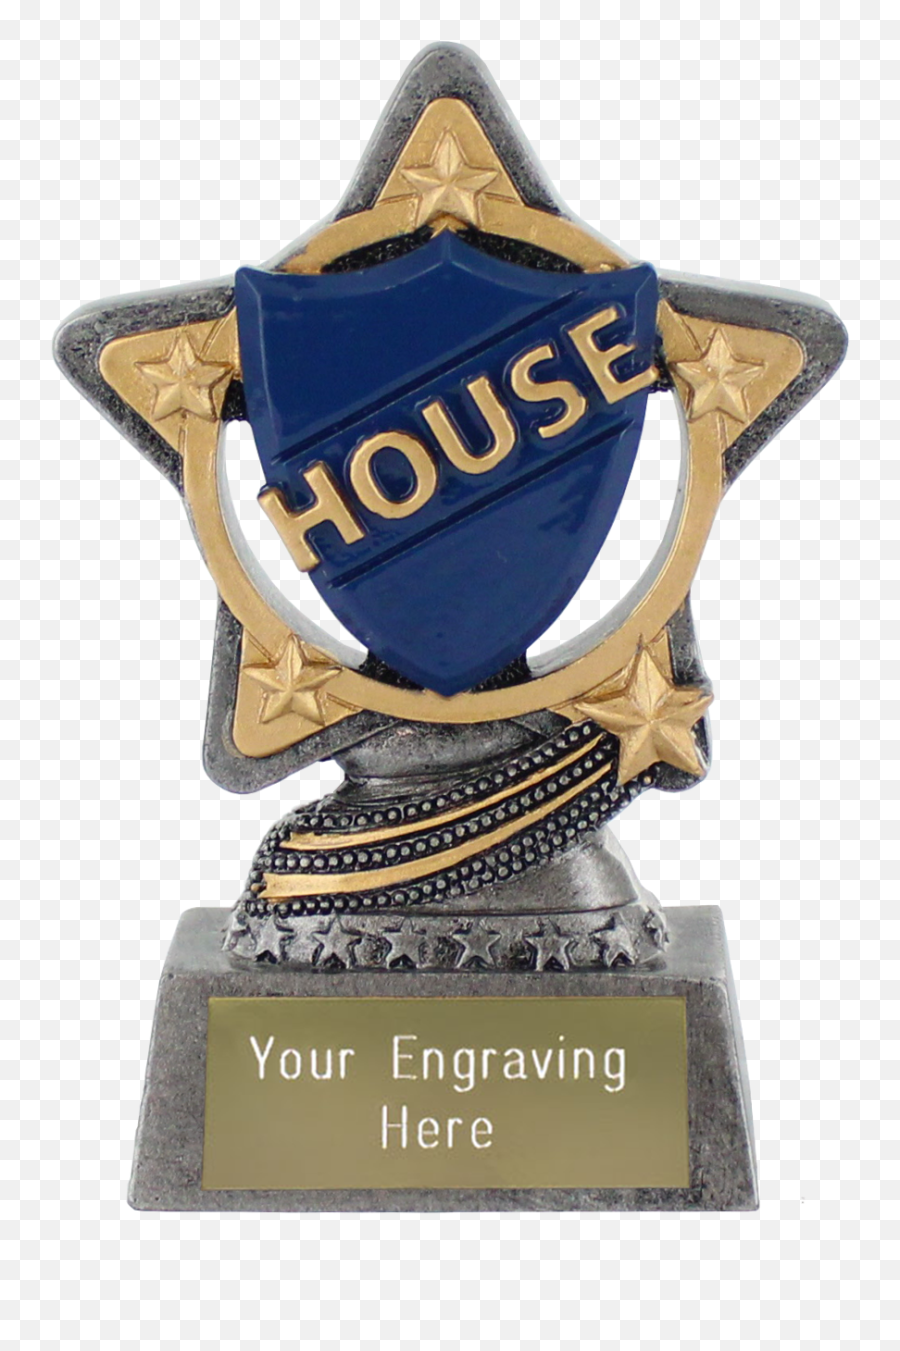 Blue House Trophy By Infinity Stars In Antique Silver 10cm 4 Emoji,1st Place Medal Emoji